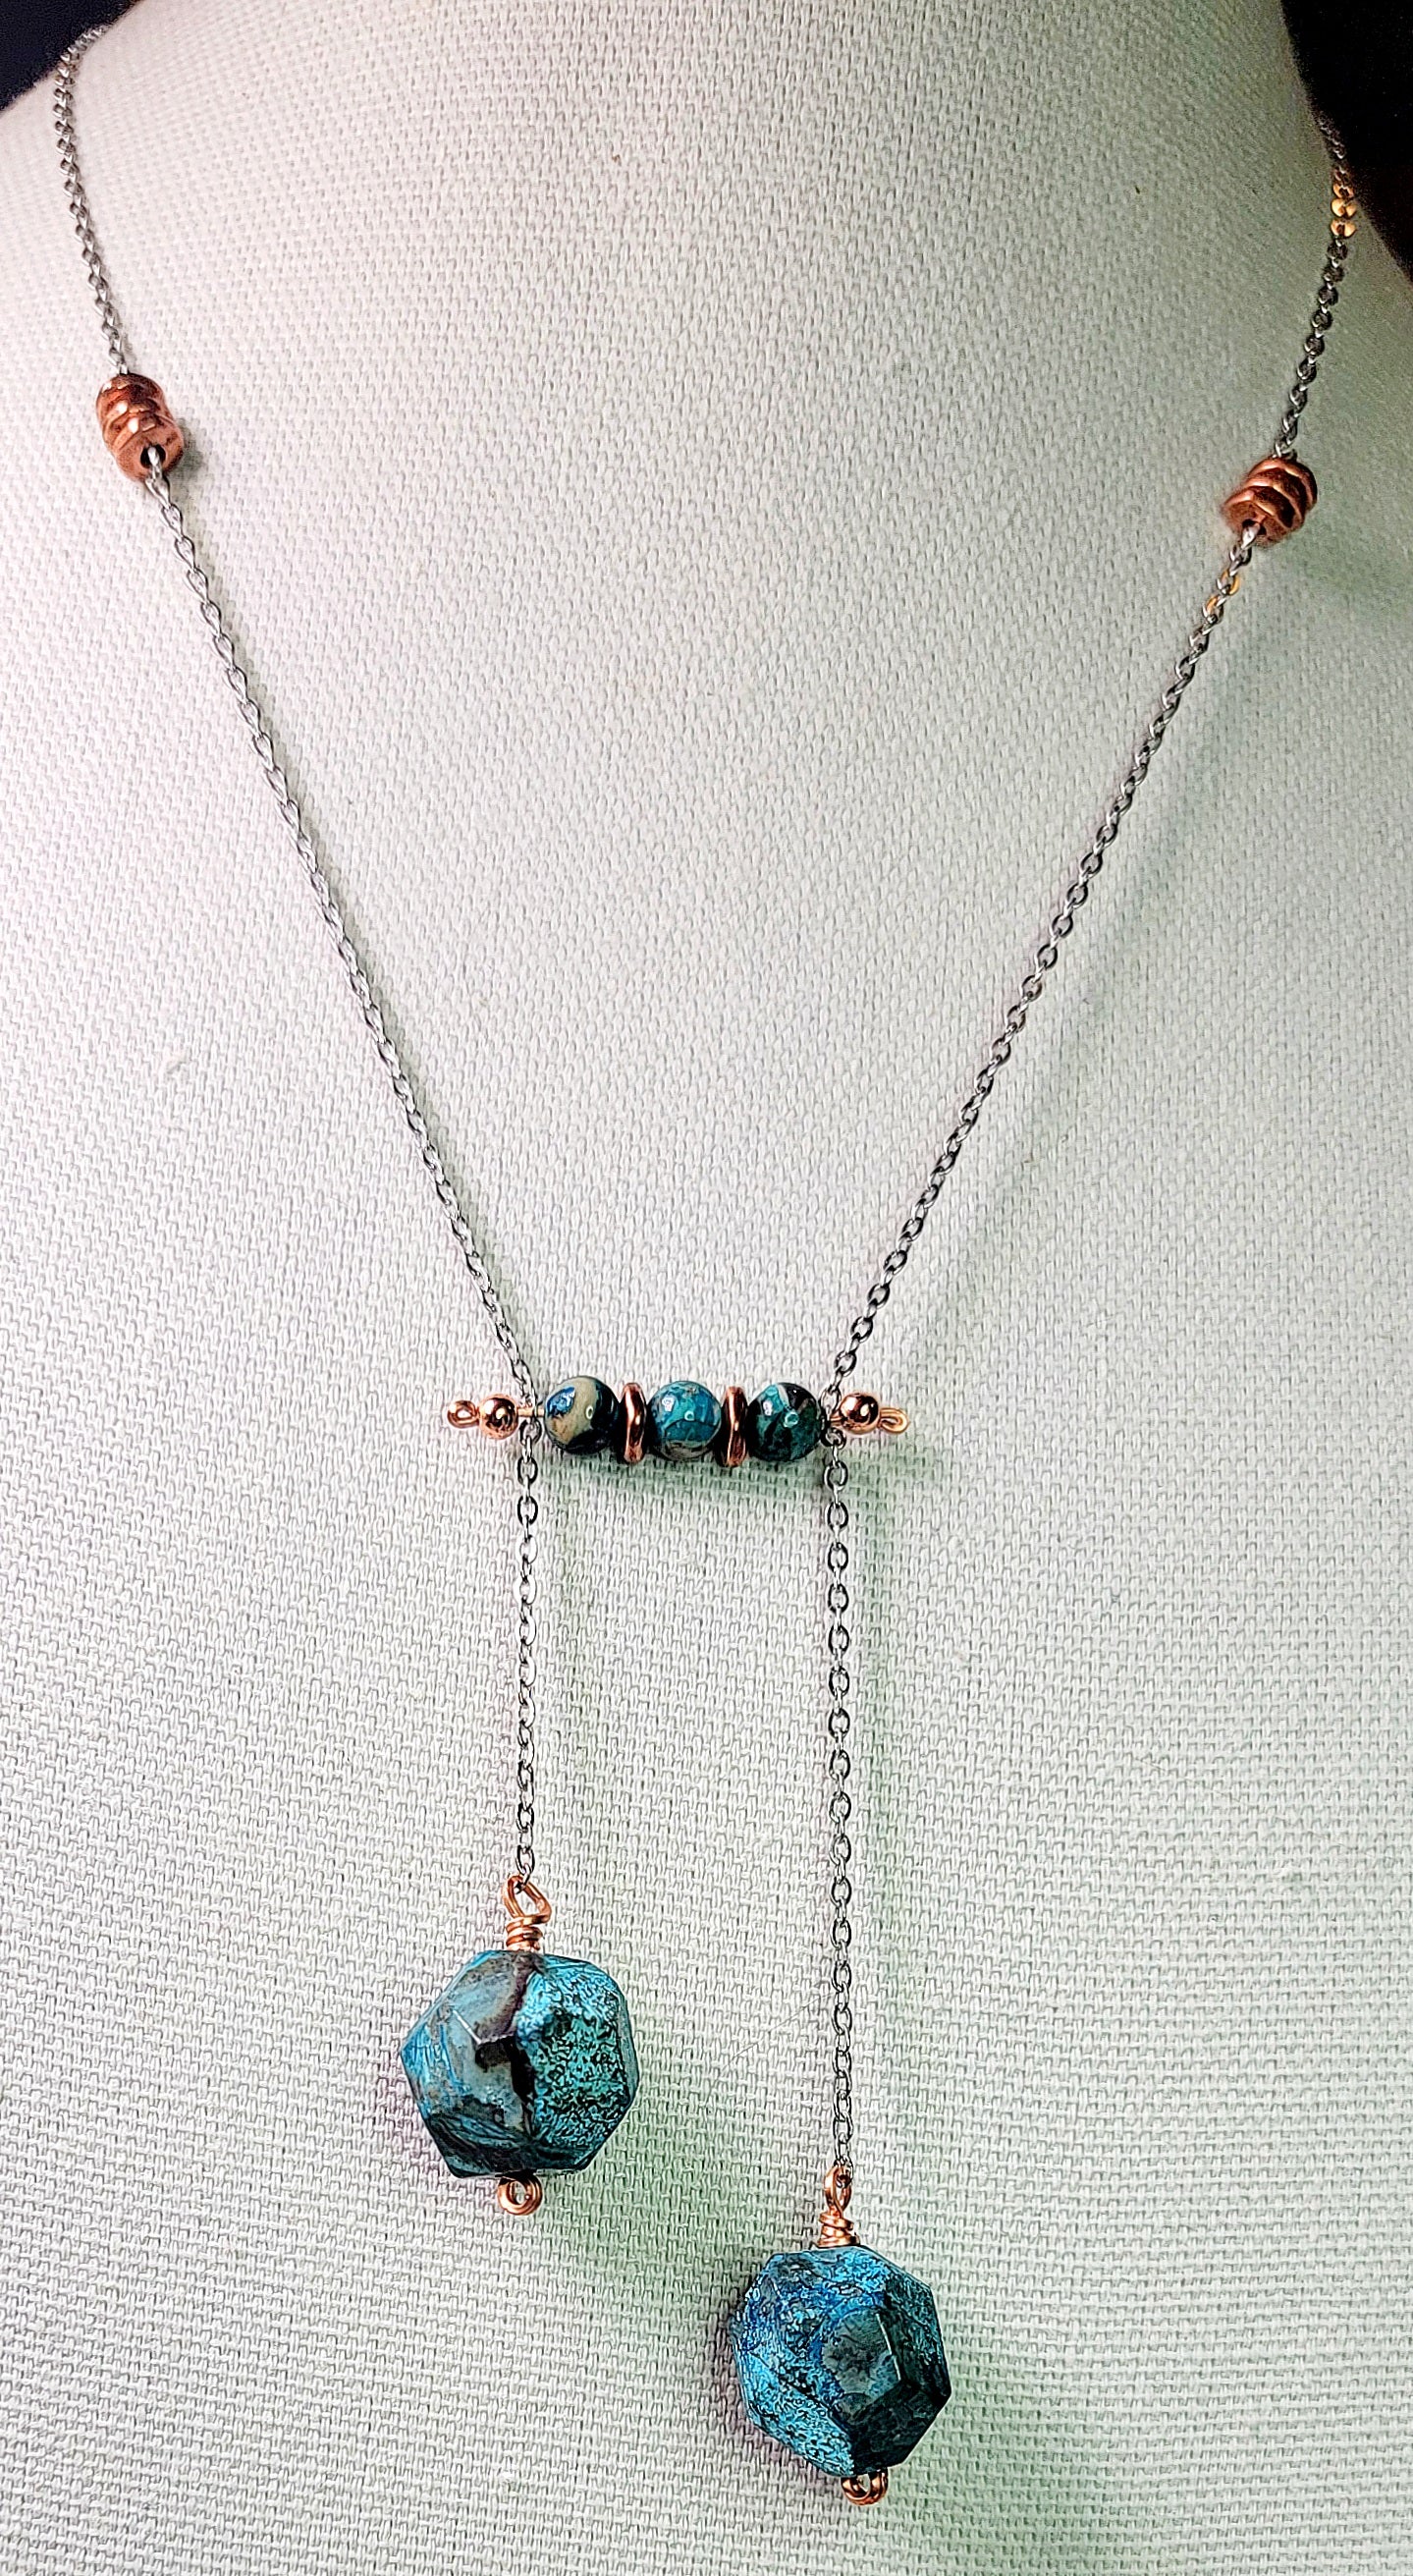 Necklace  - Turquoise and Copper with silver chain